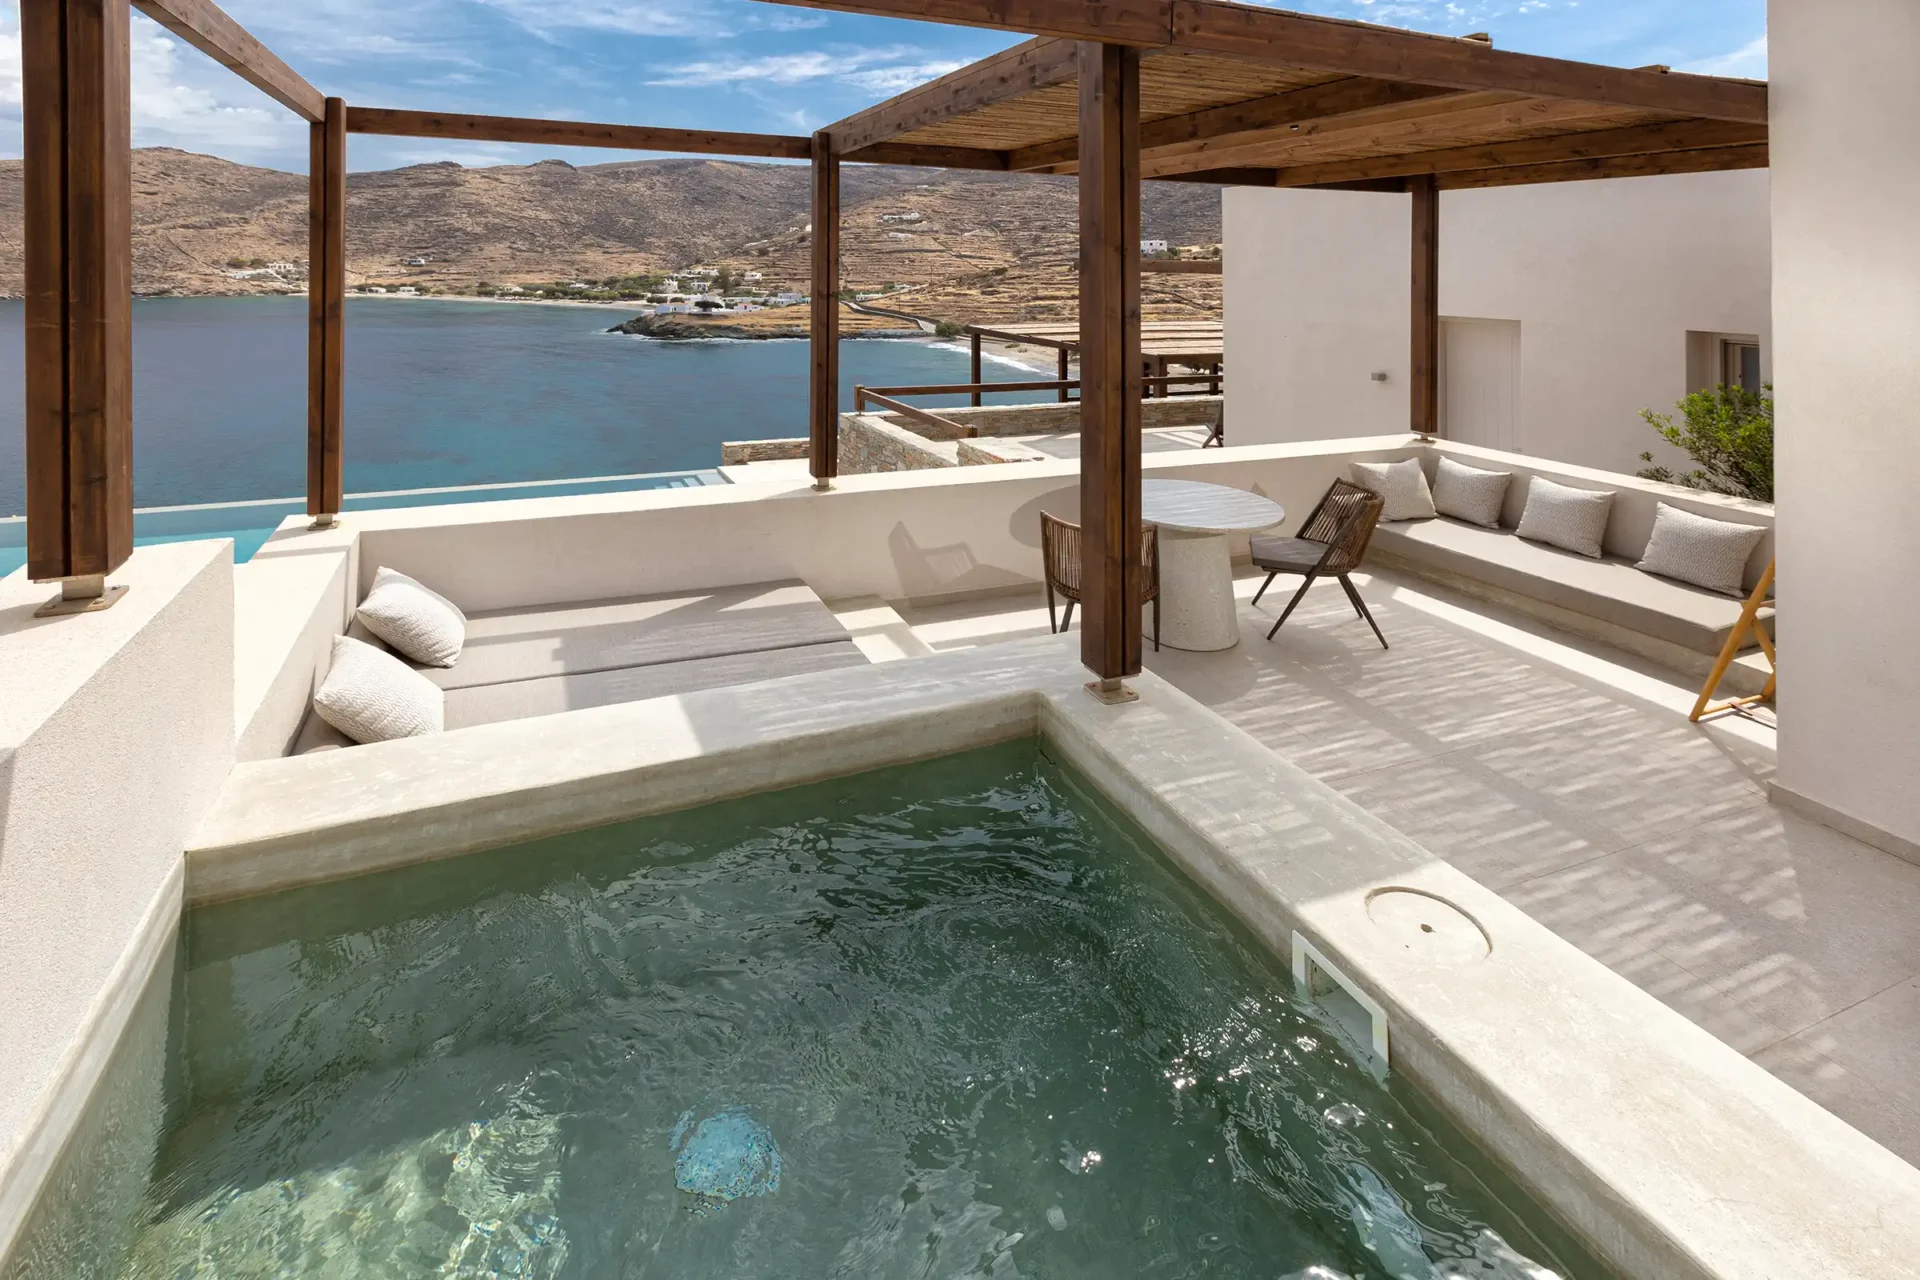 SUPERIOR SEA VIEW ROOMS WITH OUTDOOR JACUZZI